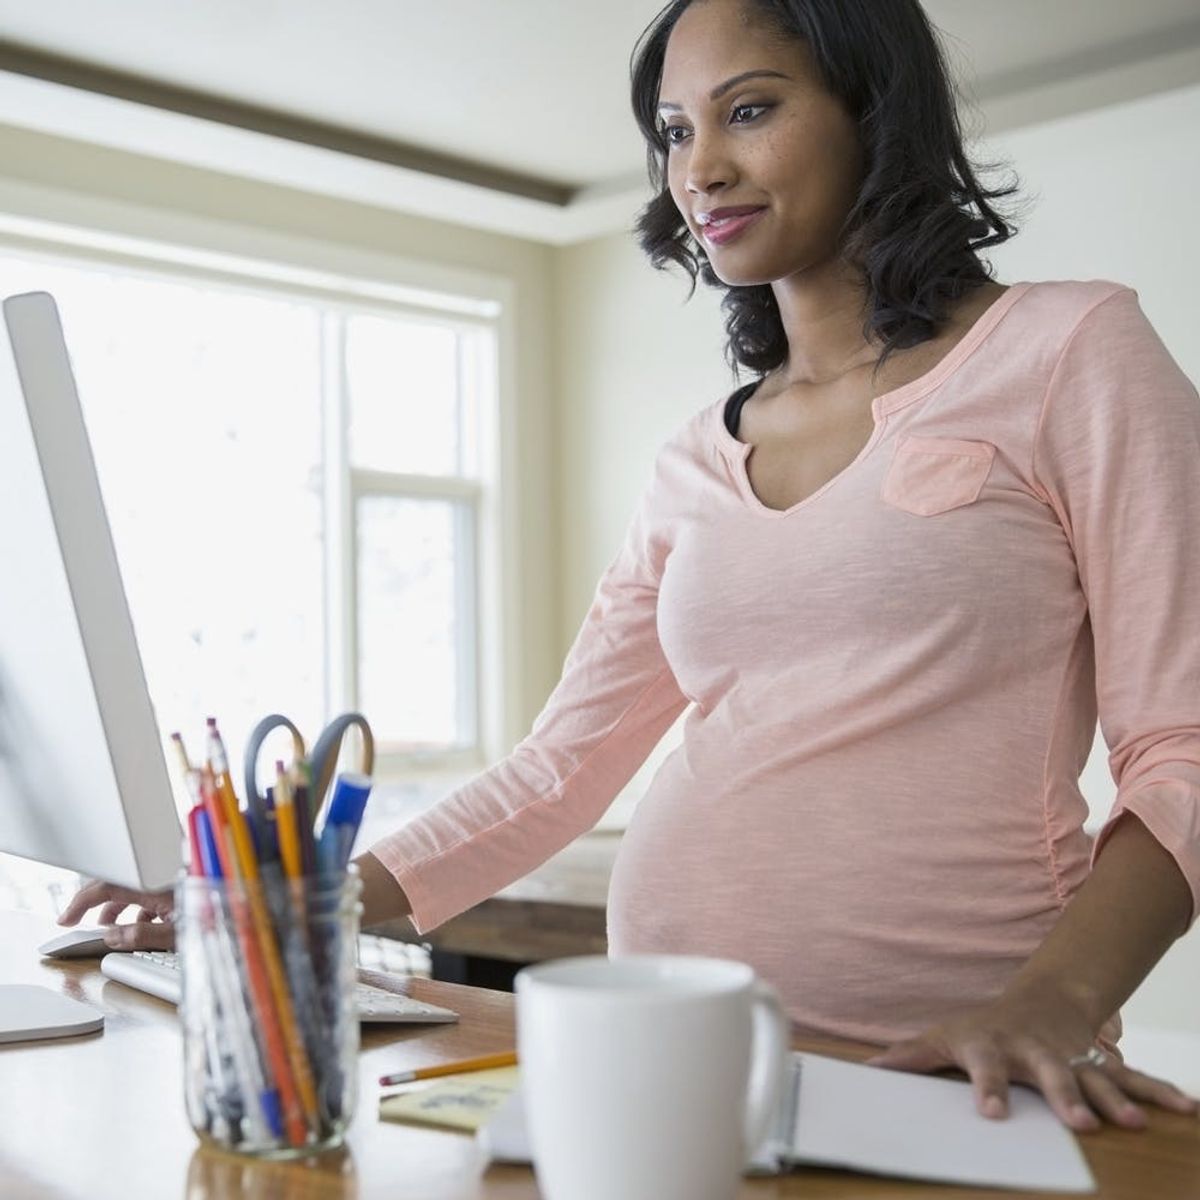 Here Are the Weird Things Pregnant Women Have Googled